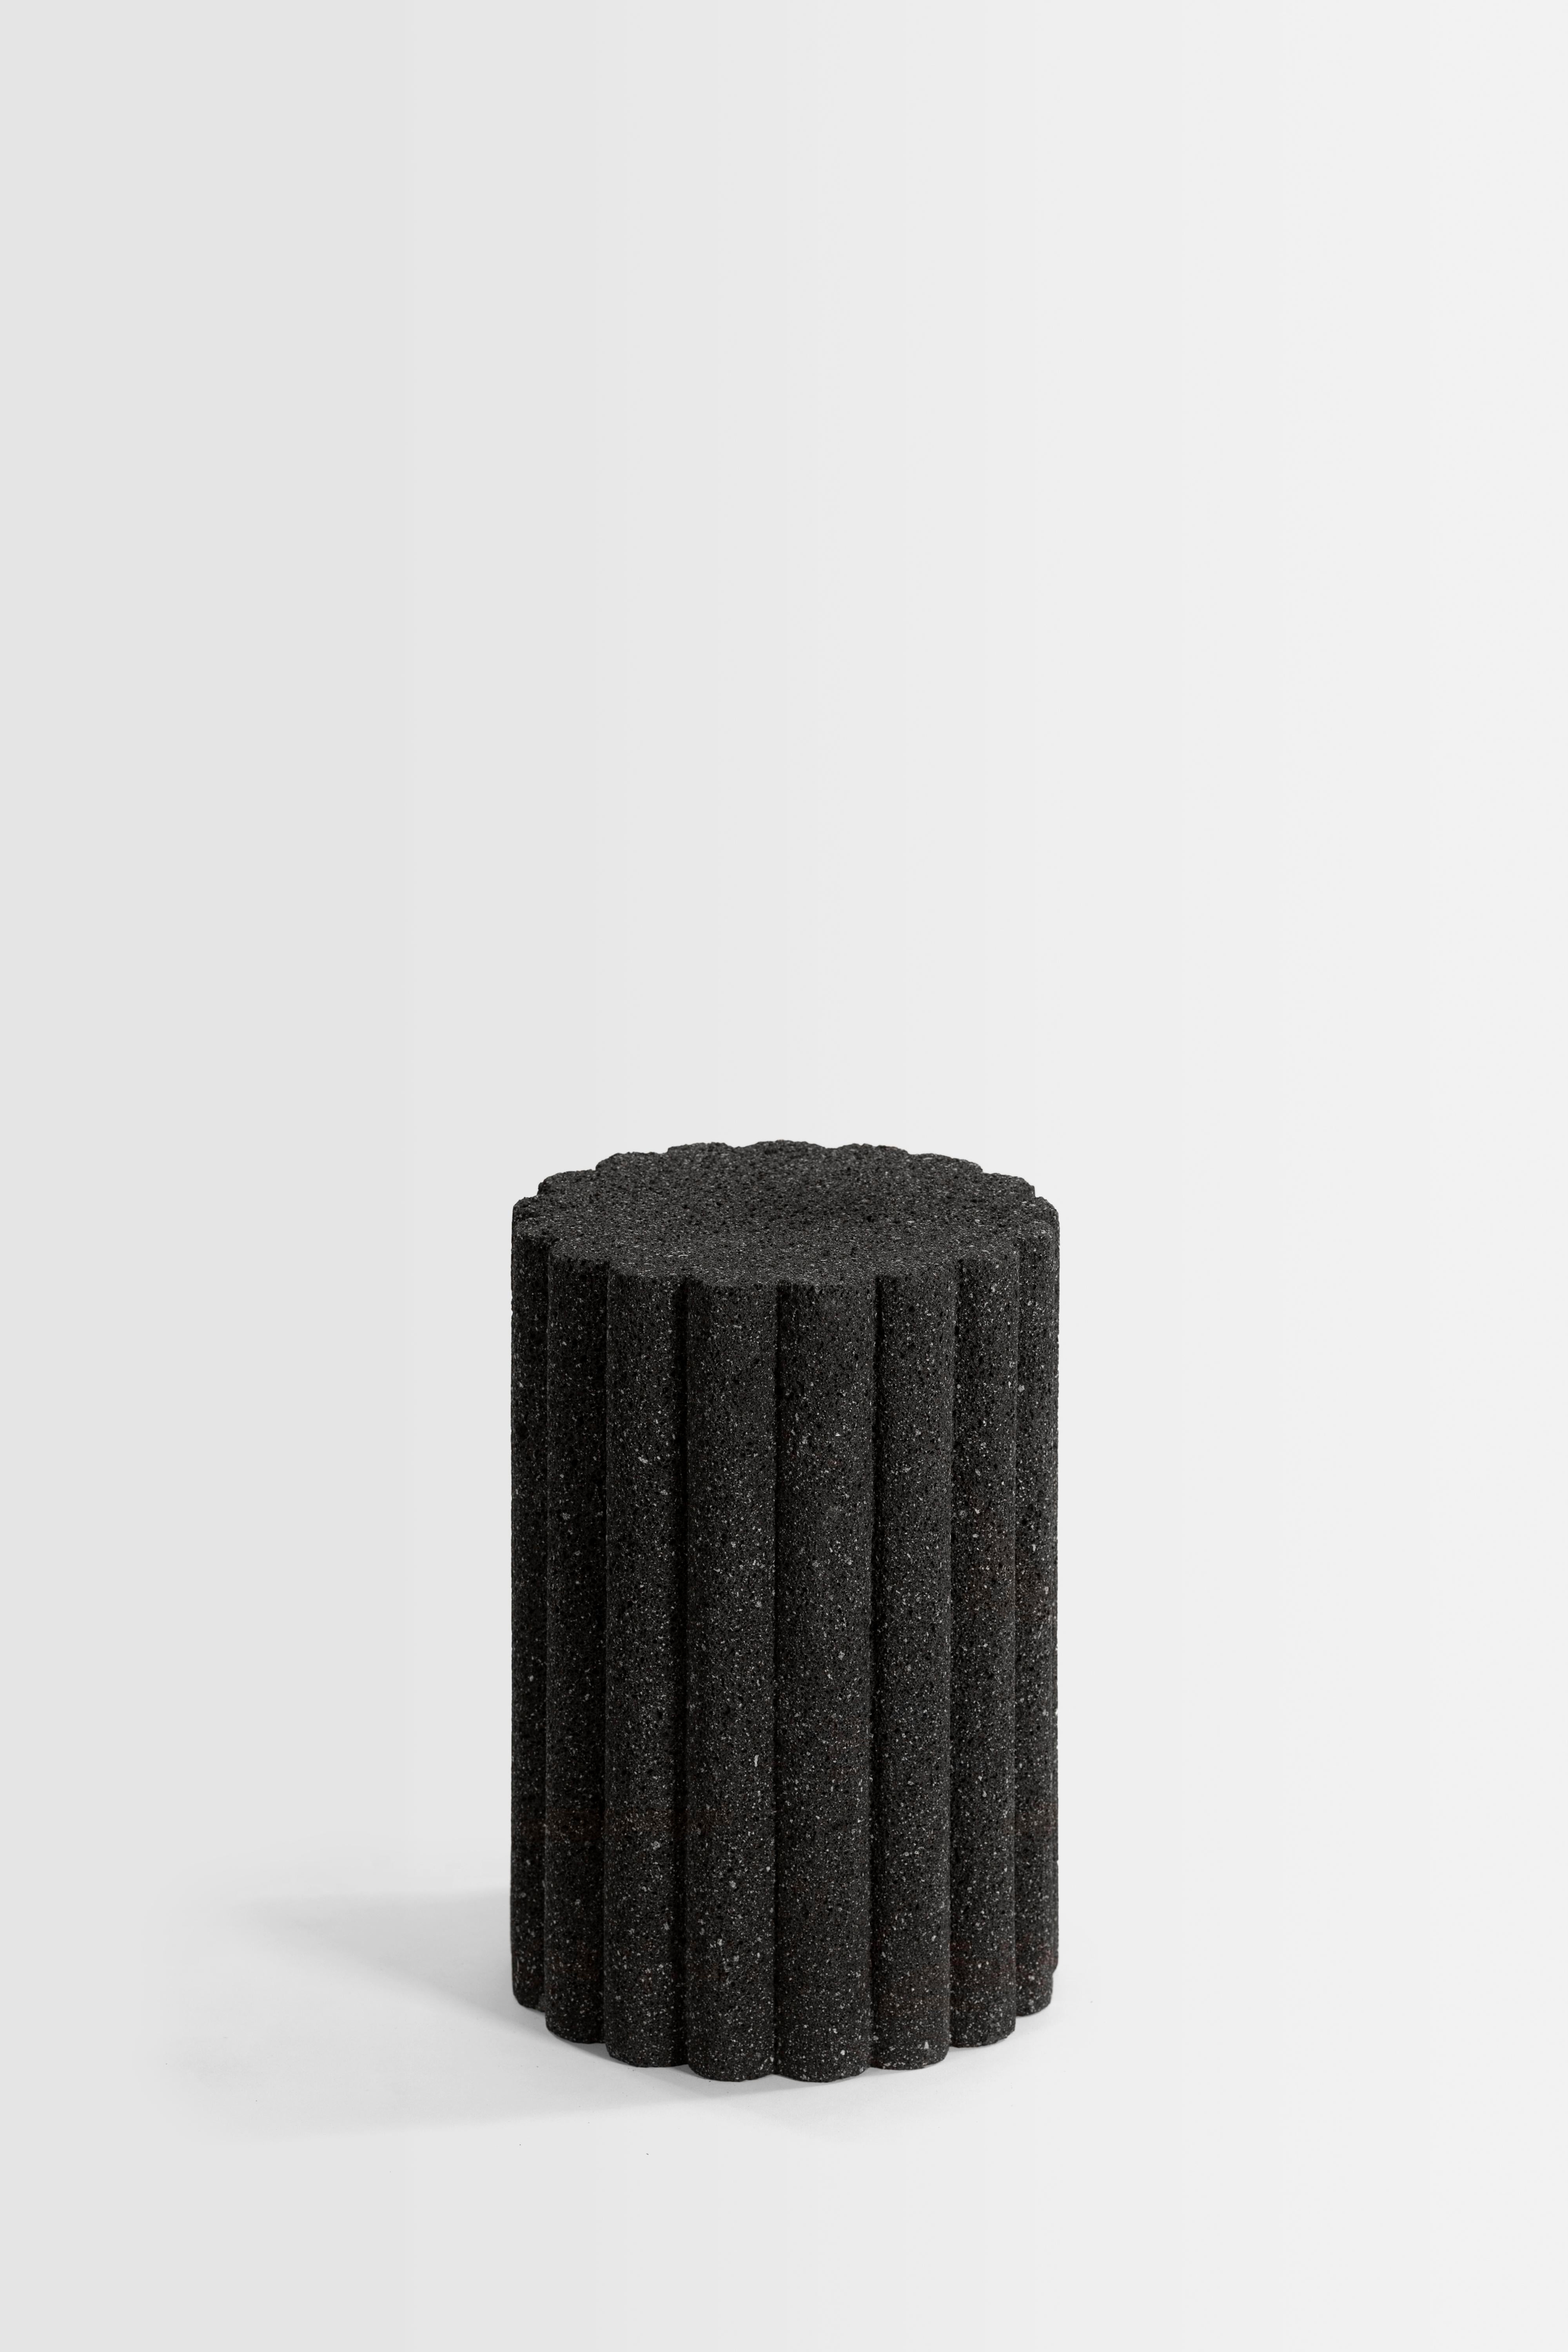 Loto Roca is exploration personified. These volcanic stone monoliths have been carved mastering a meditative process with chisel and hammer. It comes in two different width presentations and two different heights recalling esthetic character of the